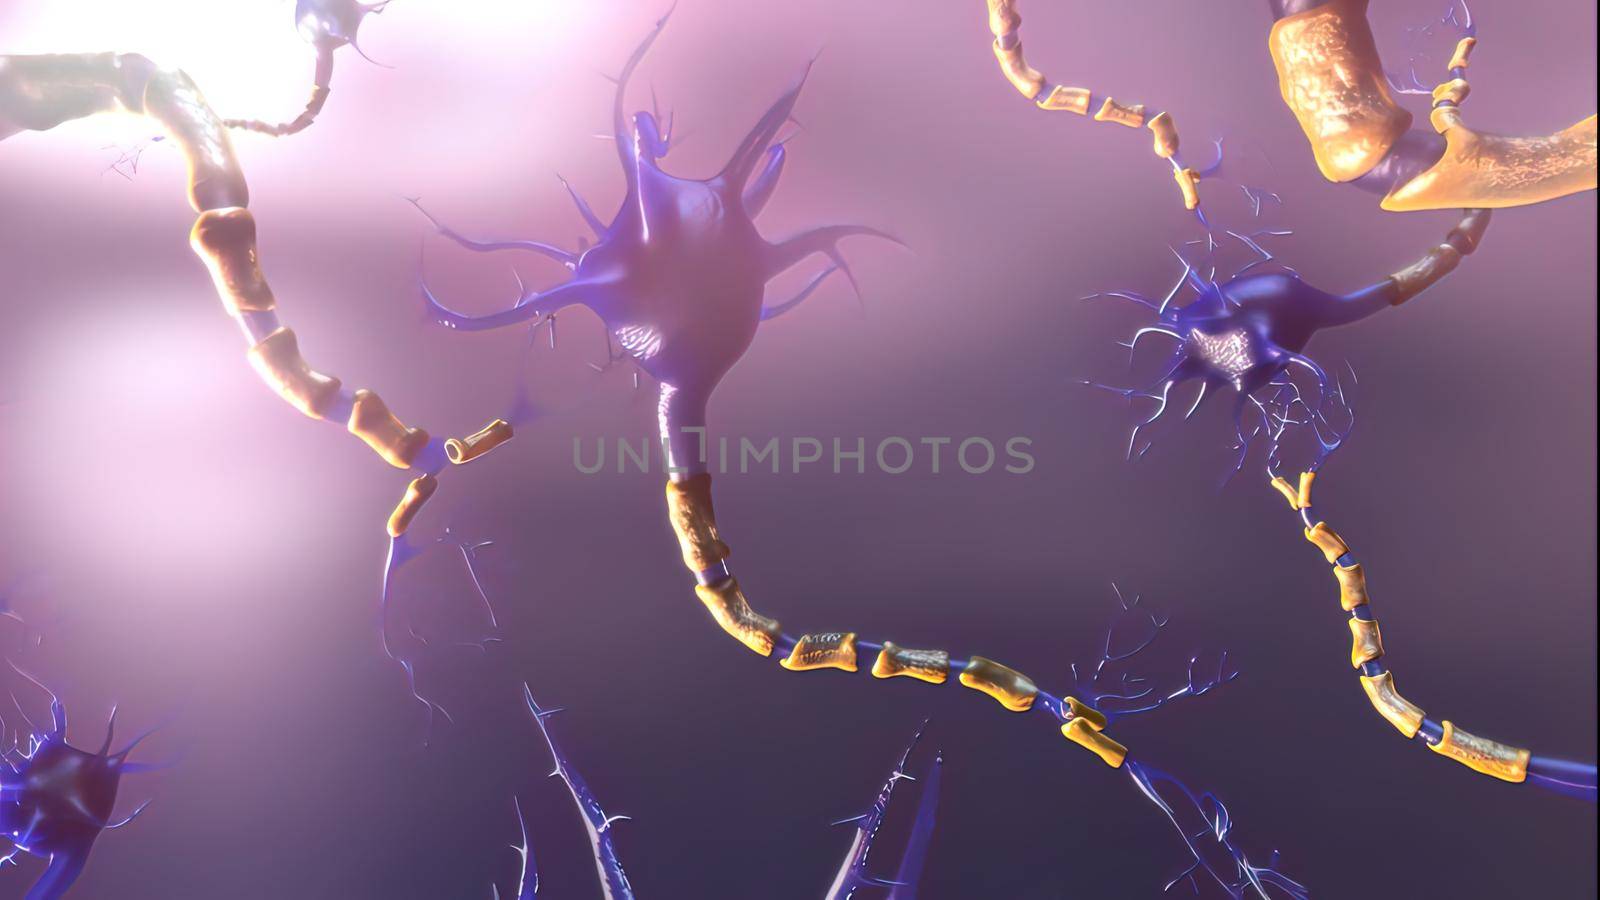 3D of neural network and neurons firing by creativepic